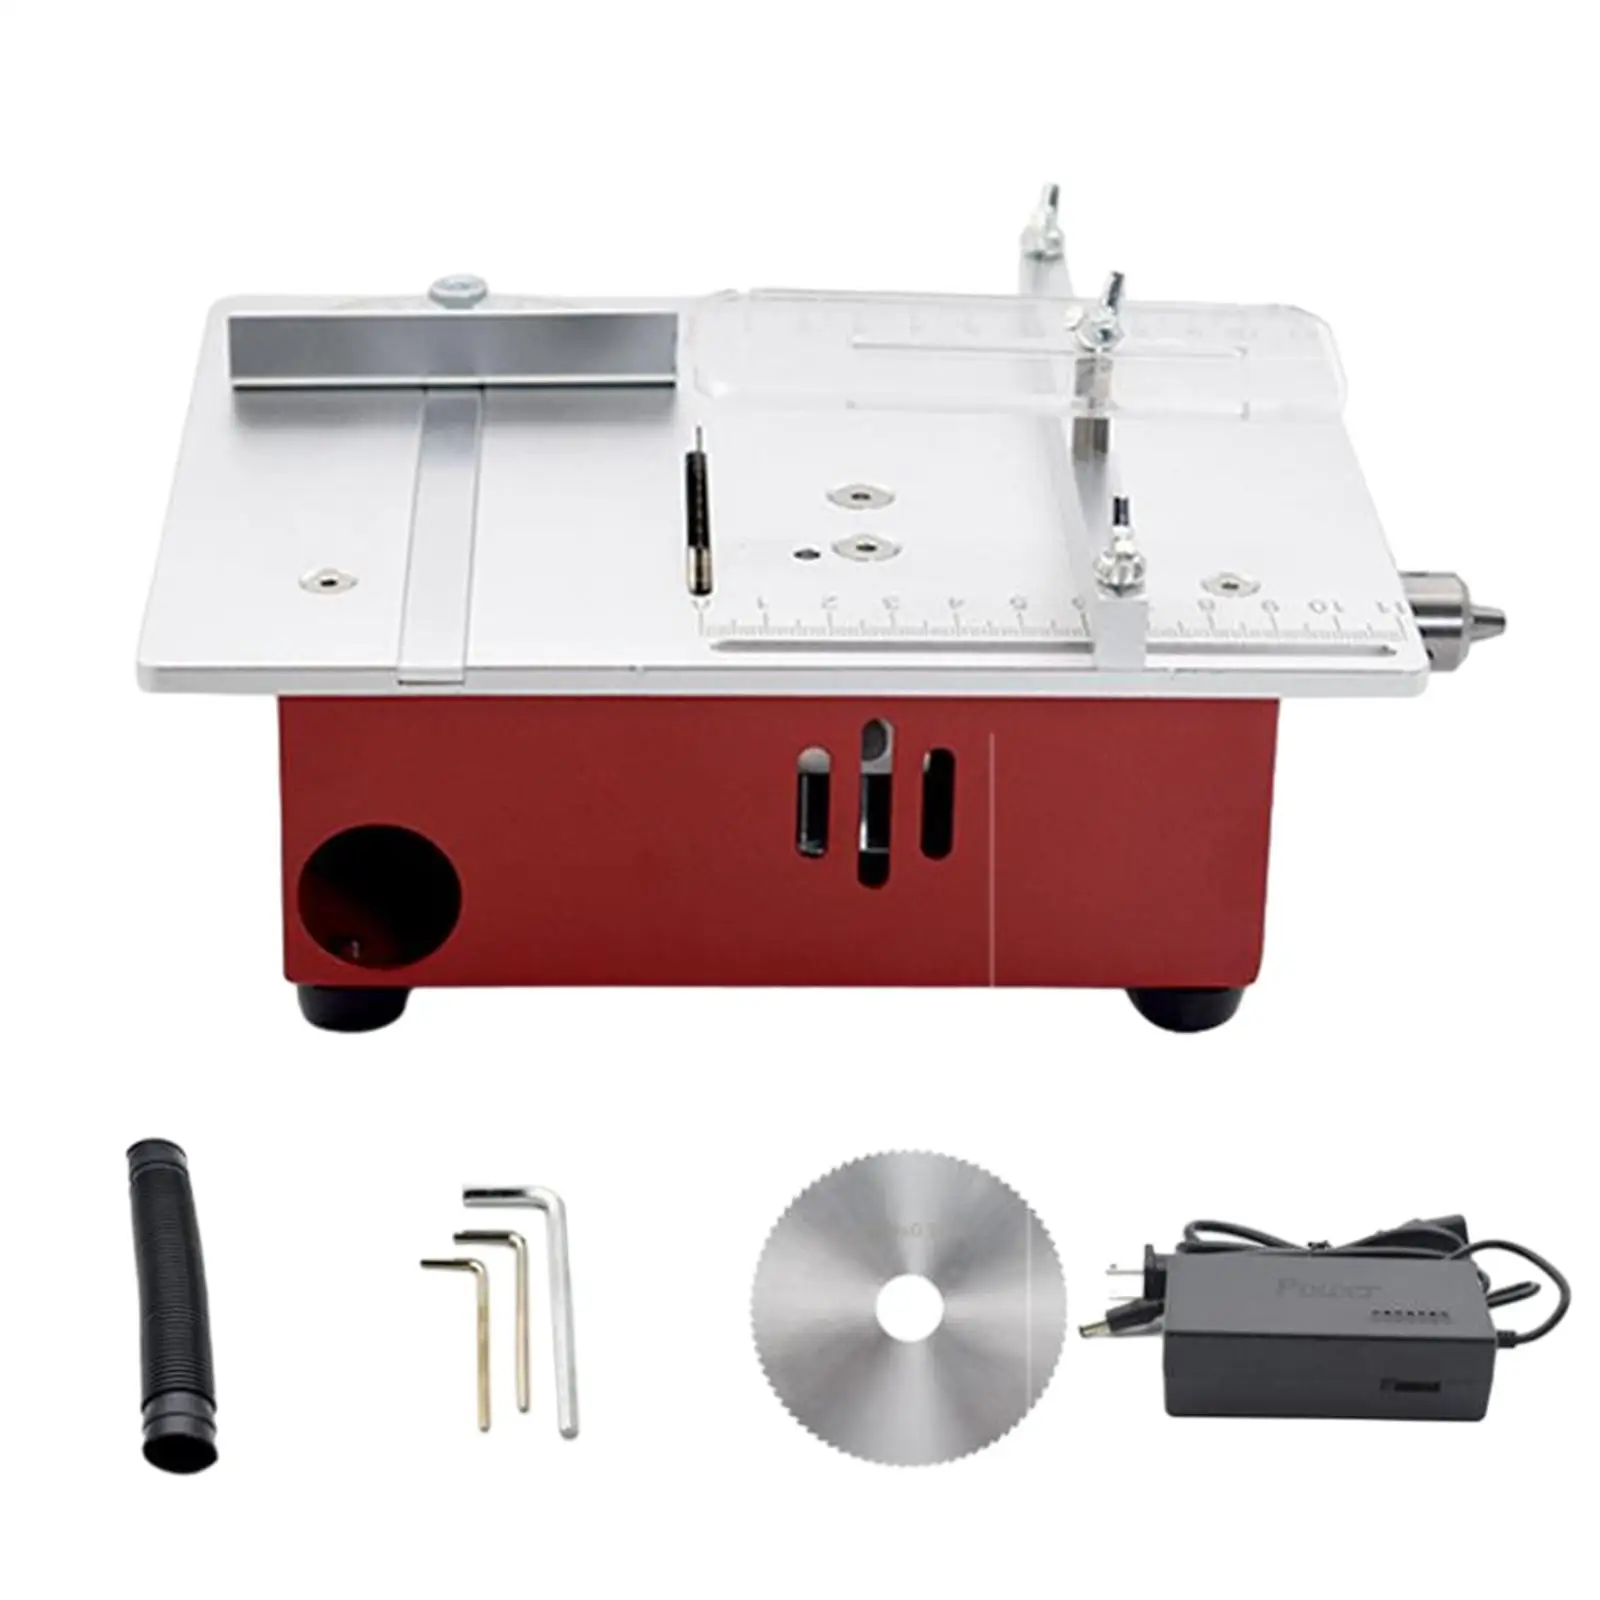 Mini Table Saw Precision Table Saw Woodworking Bench Saw for Plastic Wood Aluminum Copper Acrylic Cutting Crafts Model Making